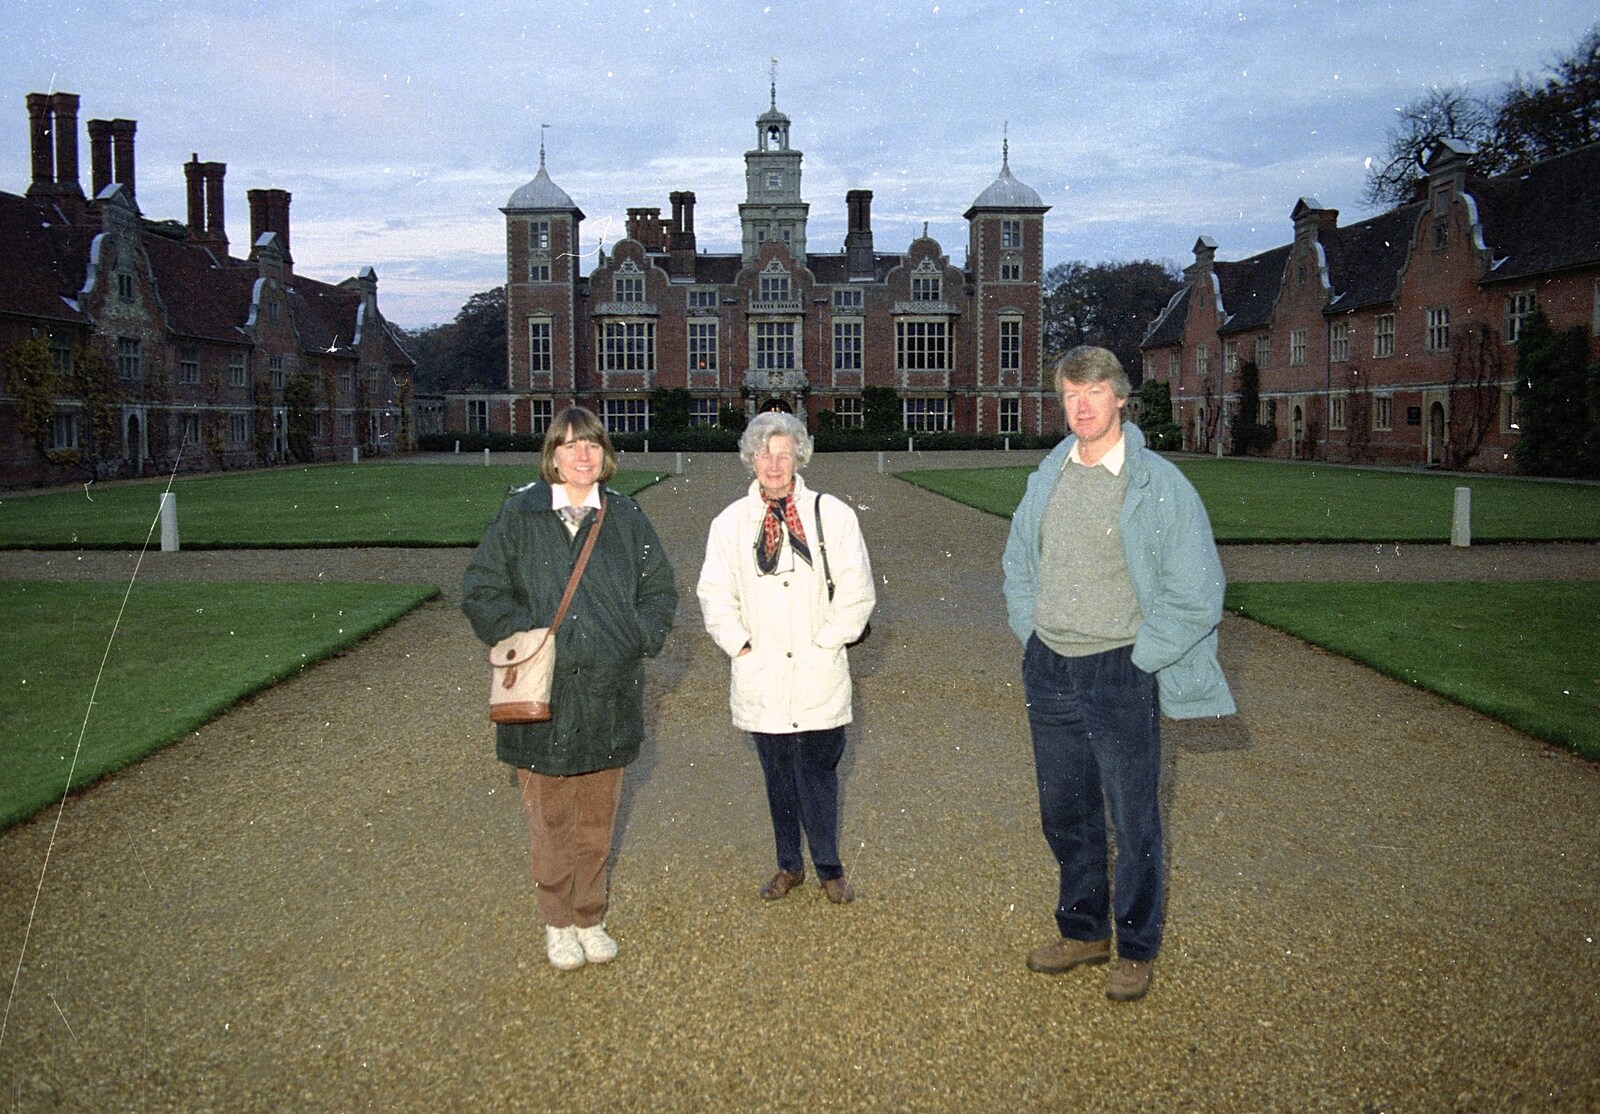 In front of Blickling Hall from Bernie's Anniversary and Charlie's Wedding, Palgrave and Oakley, Suffolk - 19th July 1994